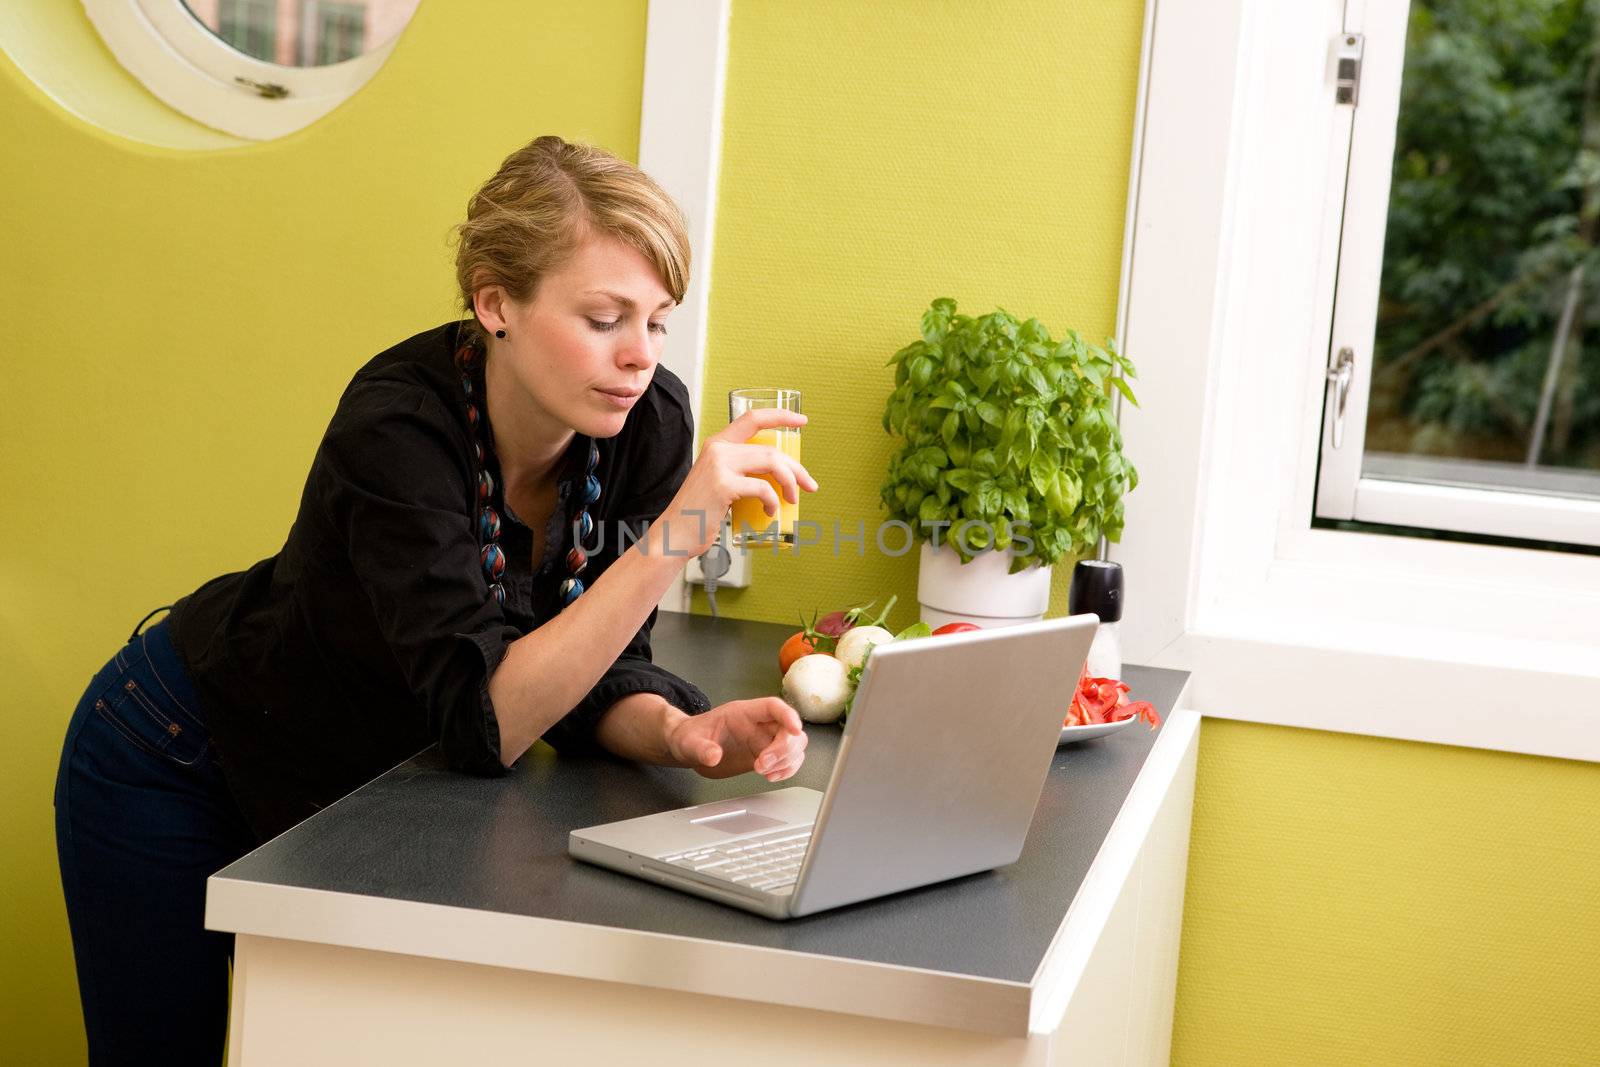 Using Laptop in Kitchen by leaf